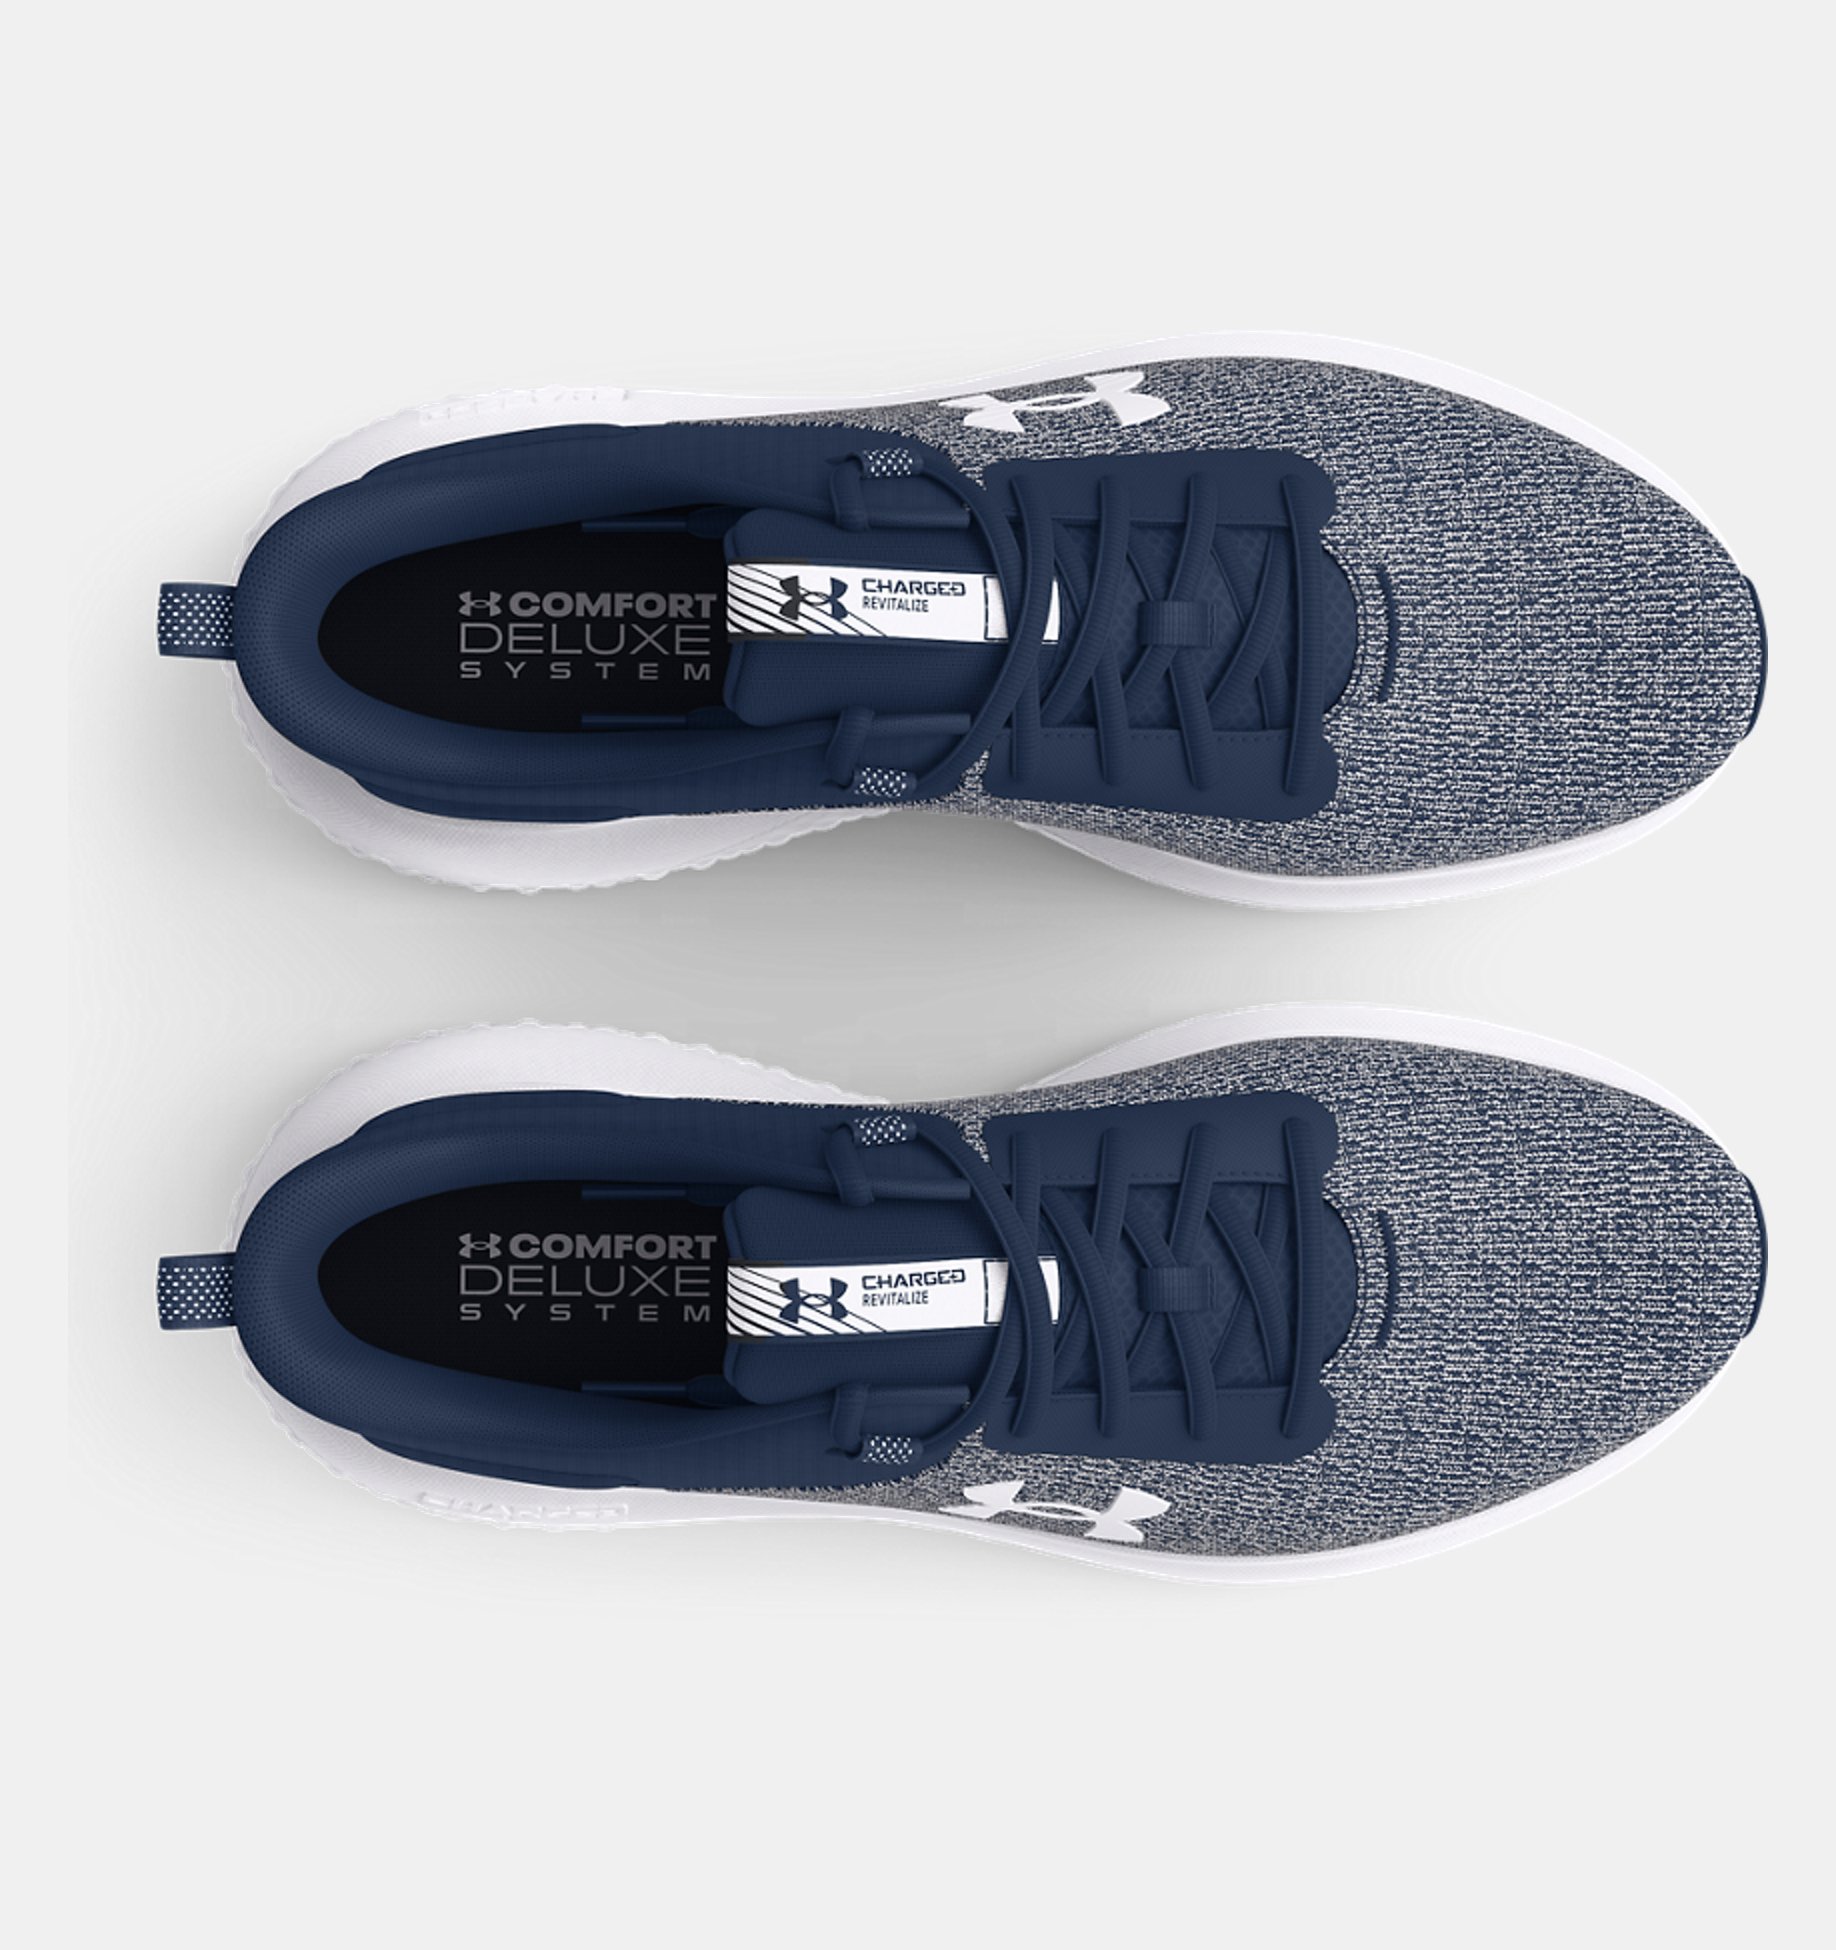 UNDER ARMOUR Charged REVITALIZED (3026679-400)